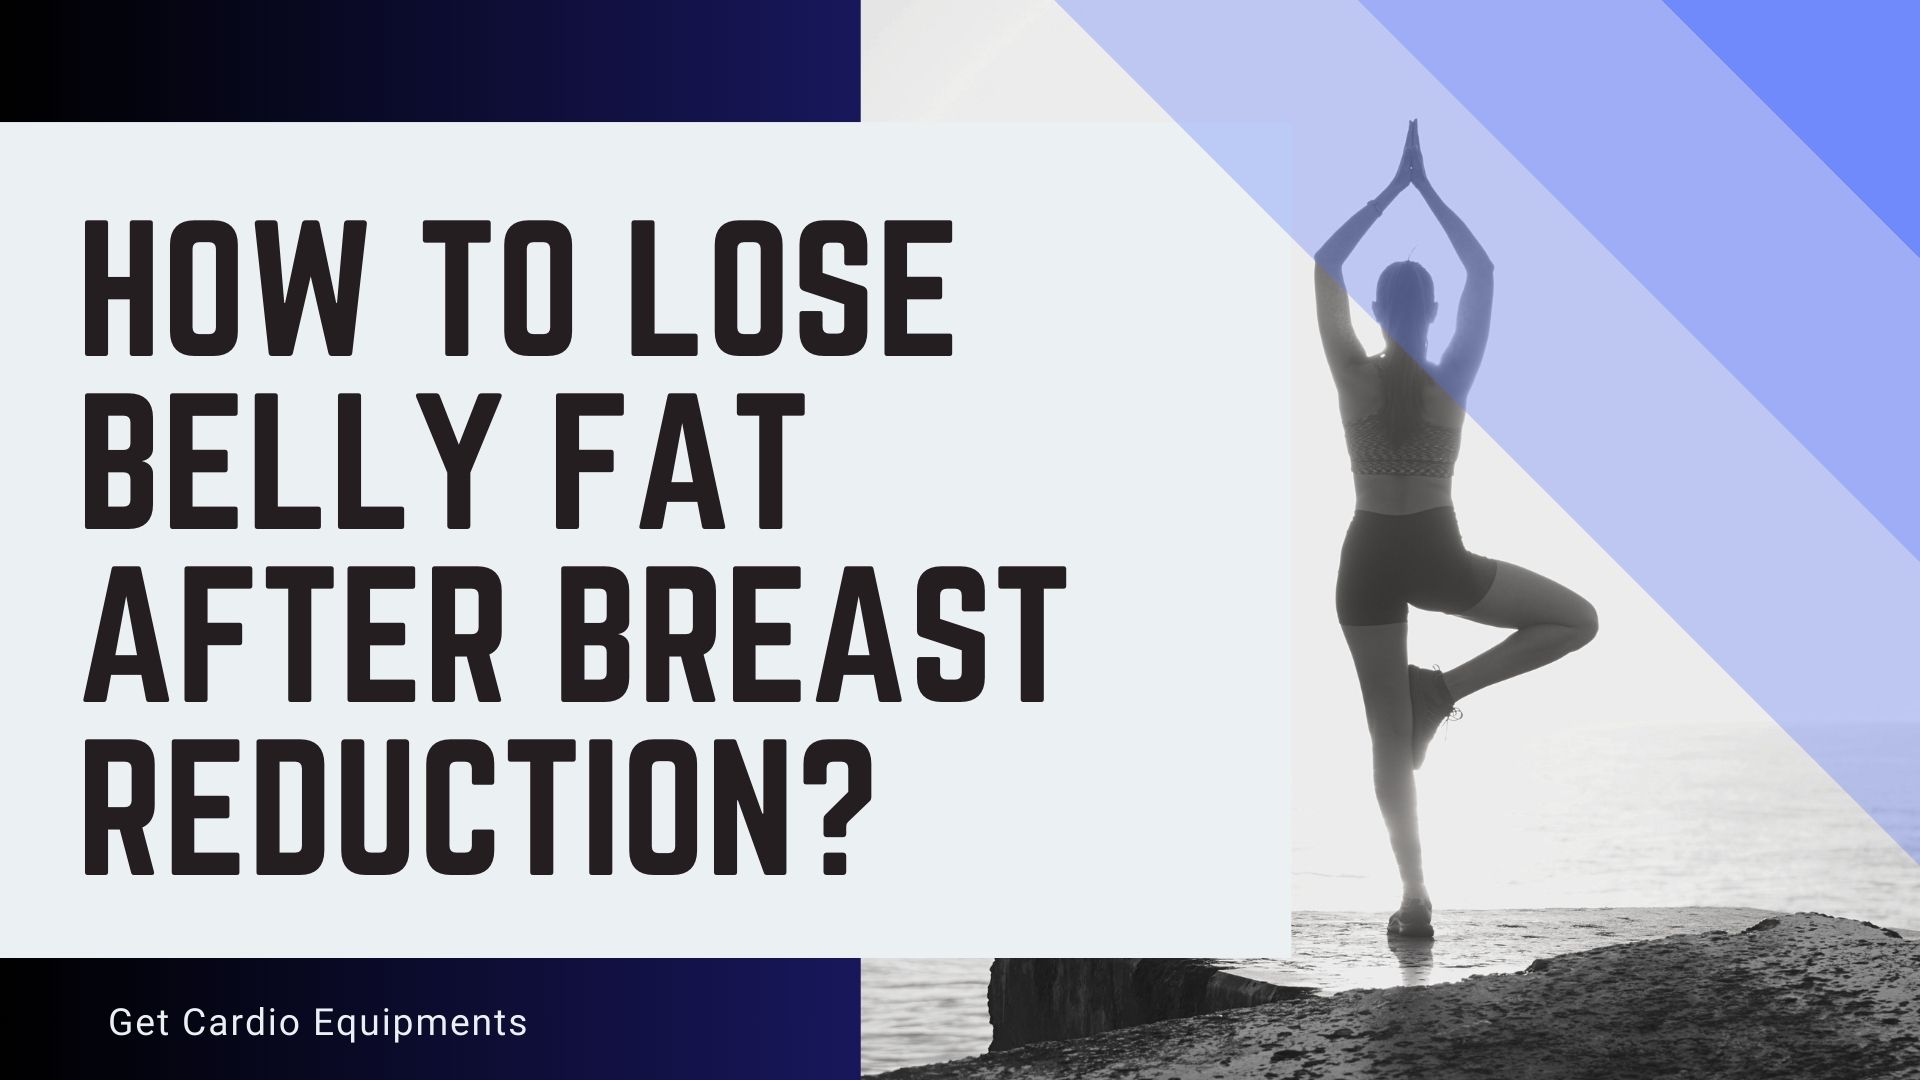 How to Lose Belly Fat After Breast Reduction